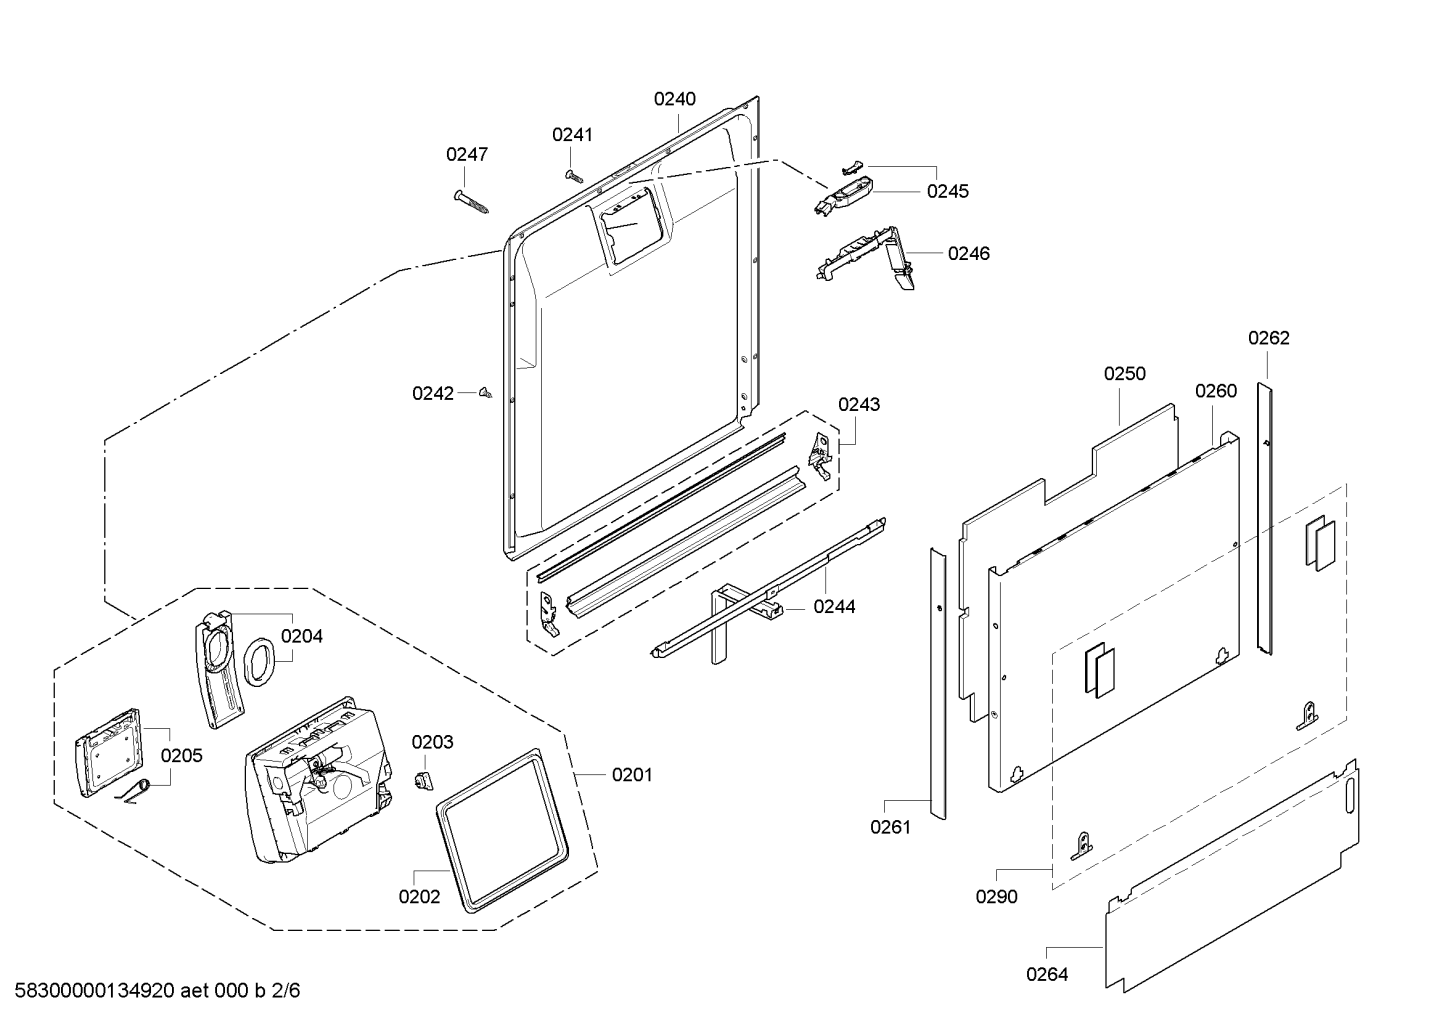 drawing_link_2_device_1564451